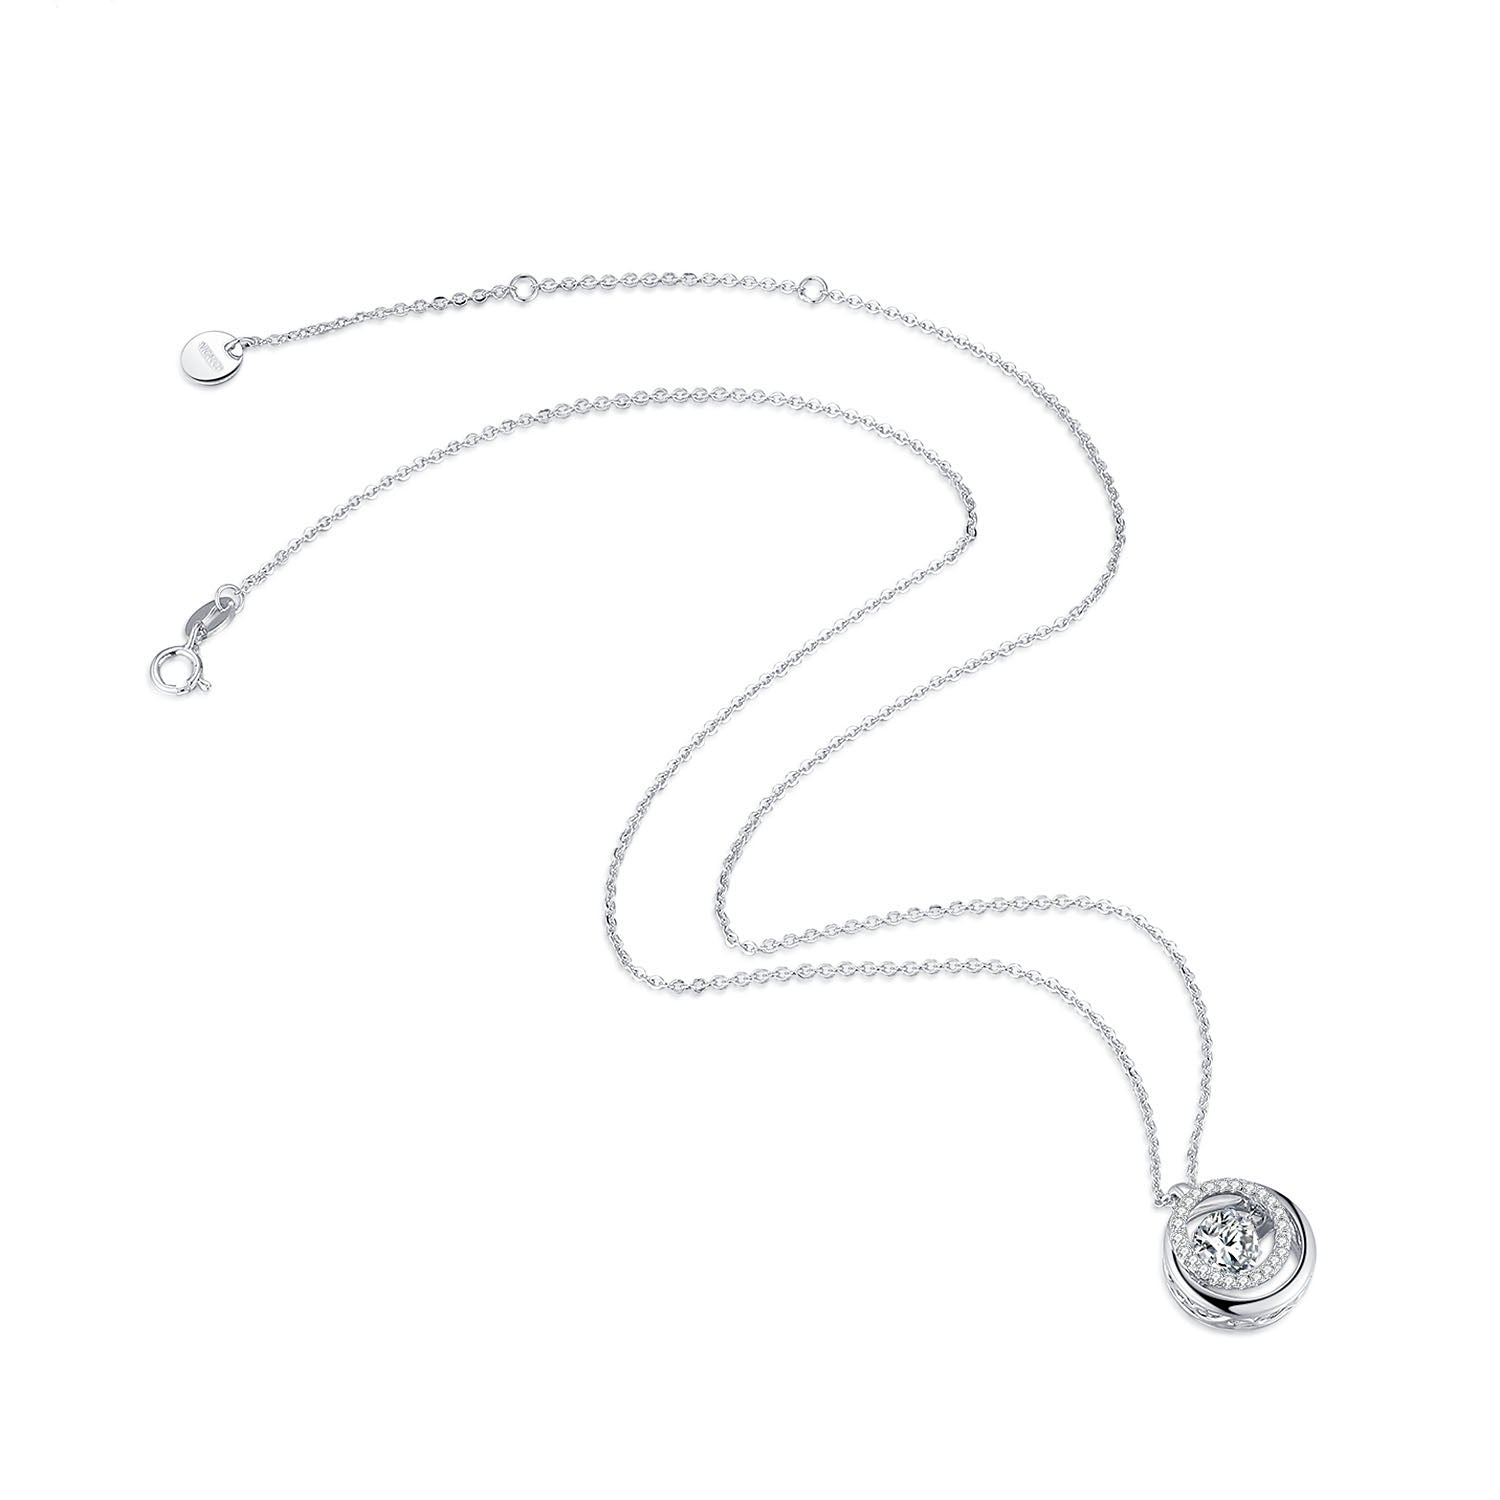 Creative round 925 sterling silver smart necklace